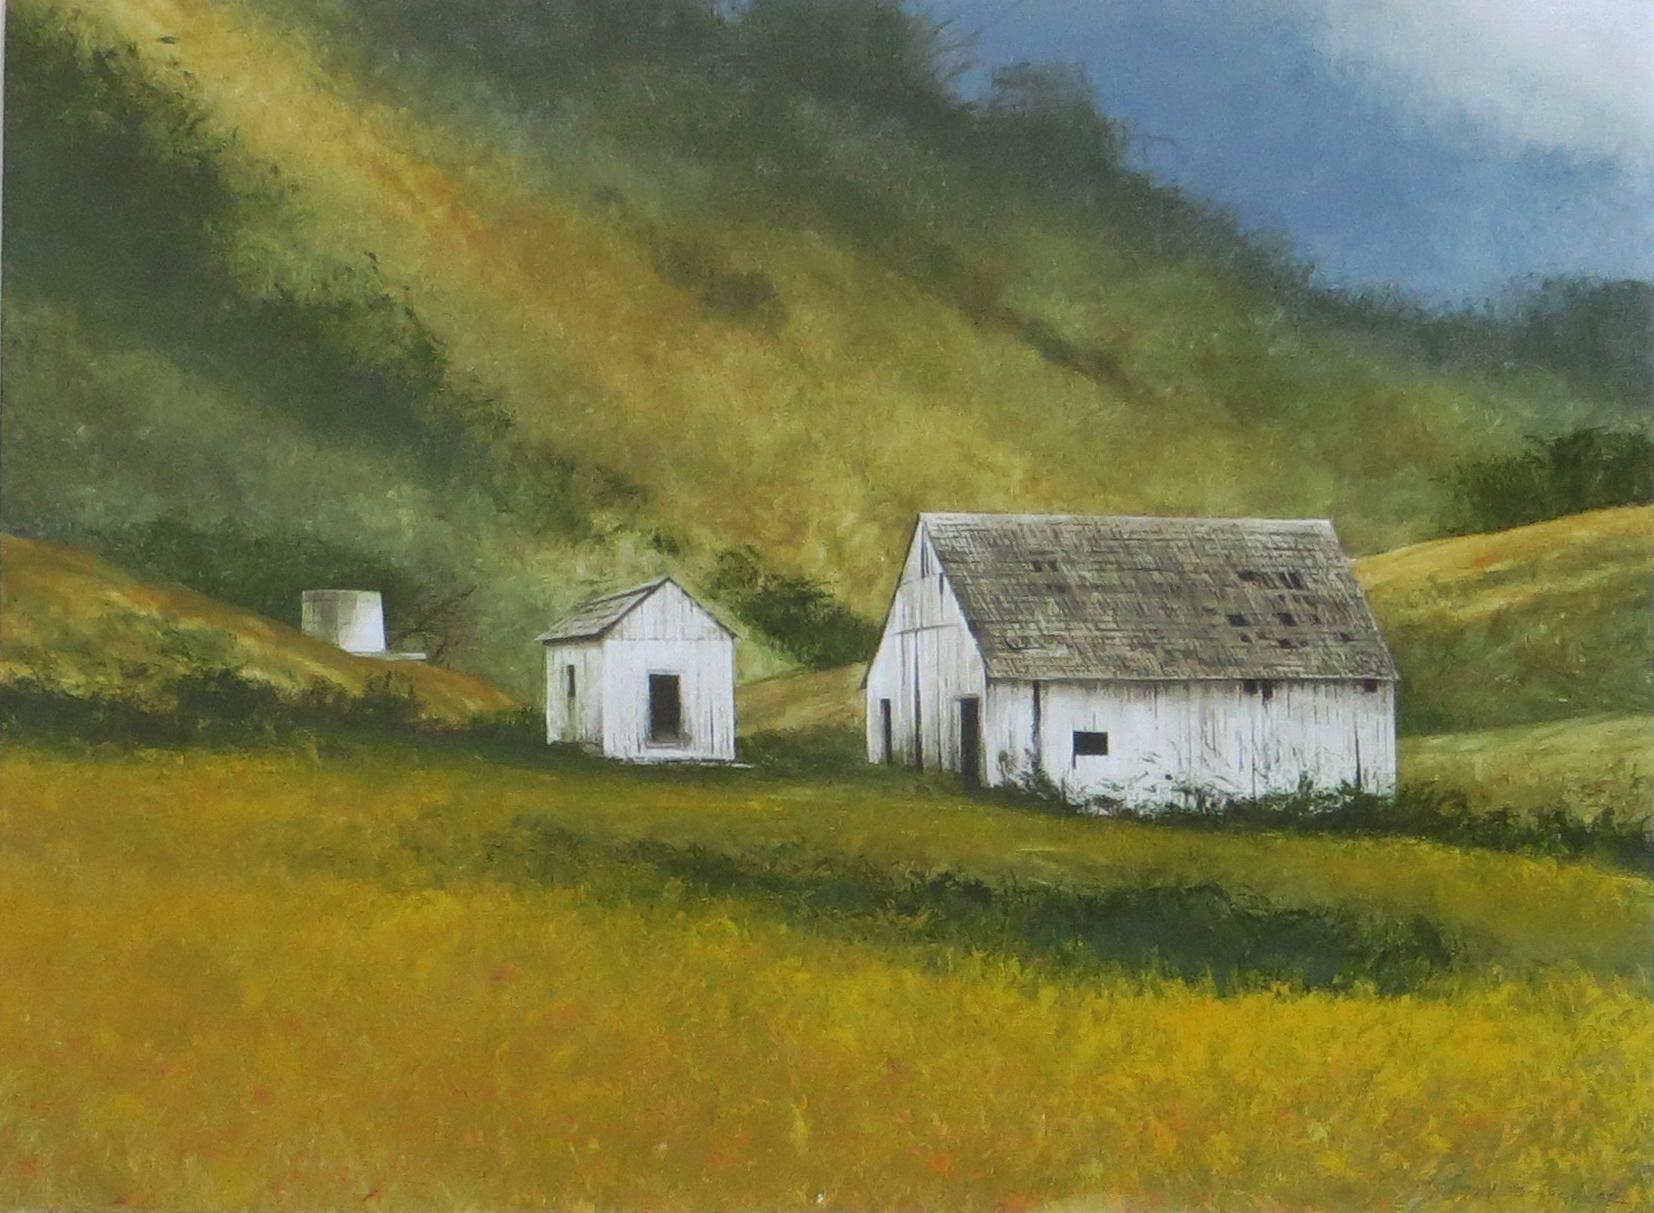 Rural Relics - Painting by Miguel Dominguez